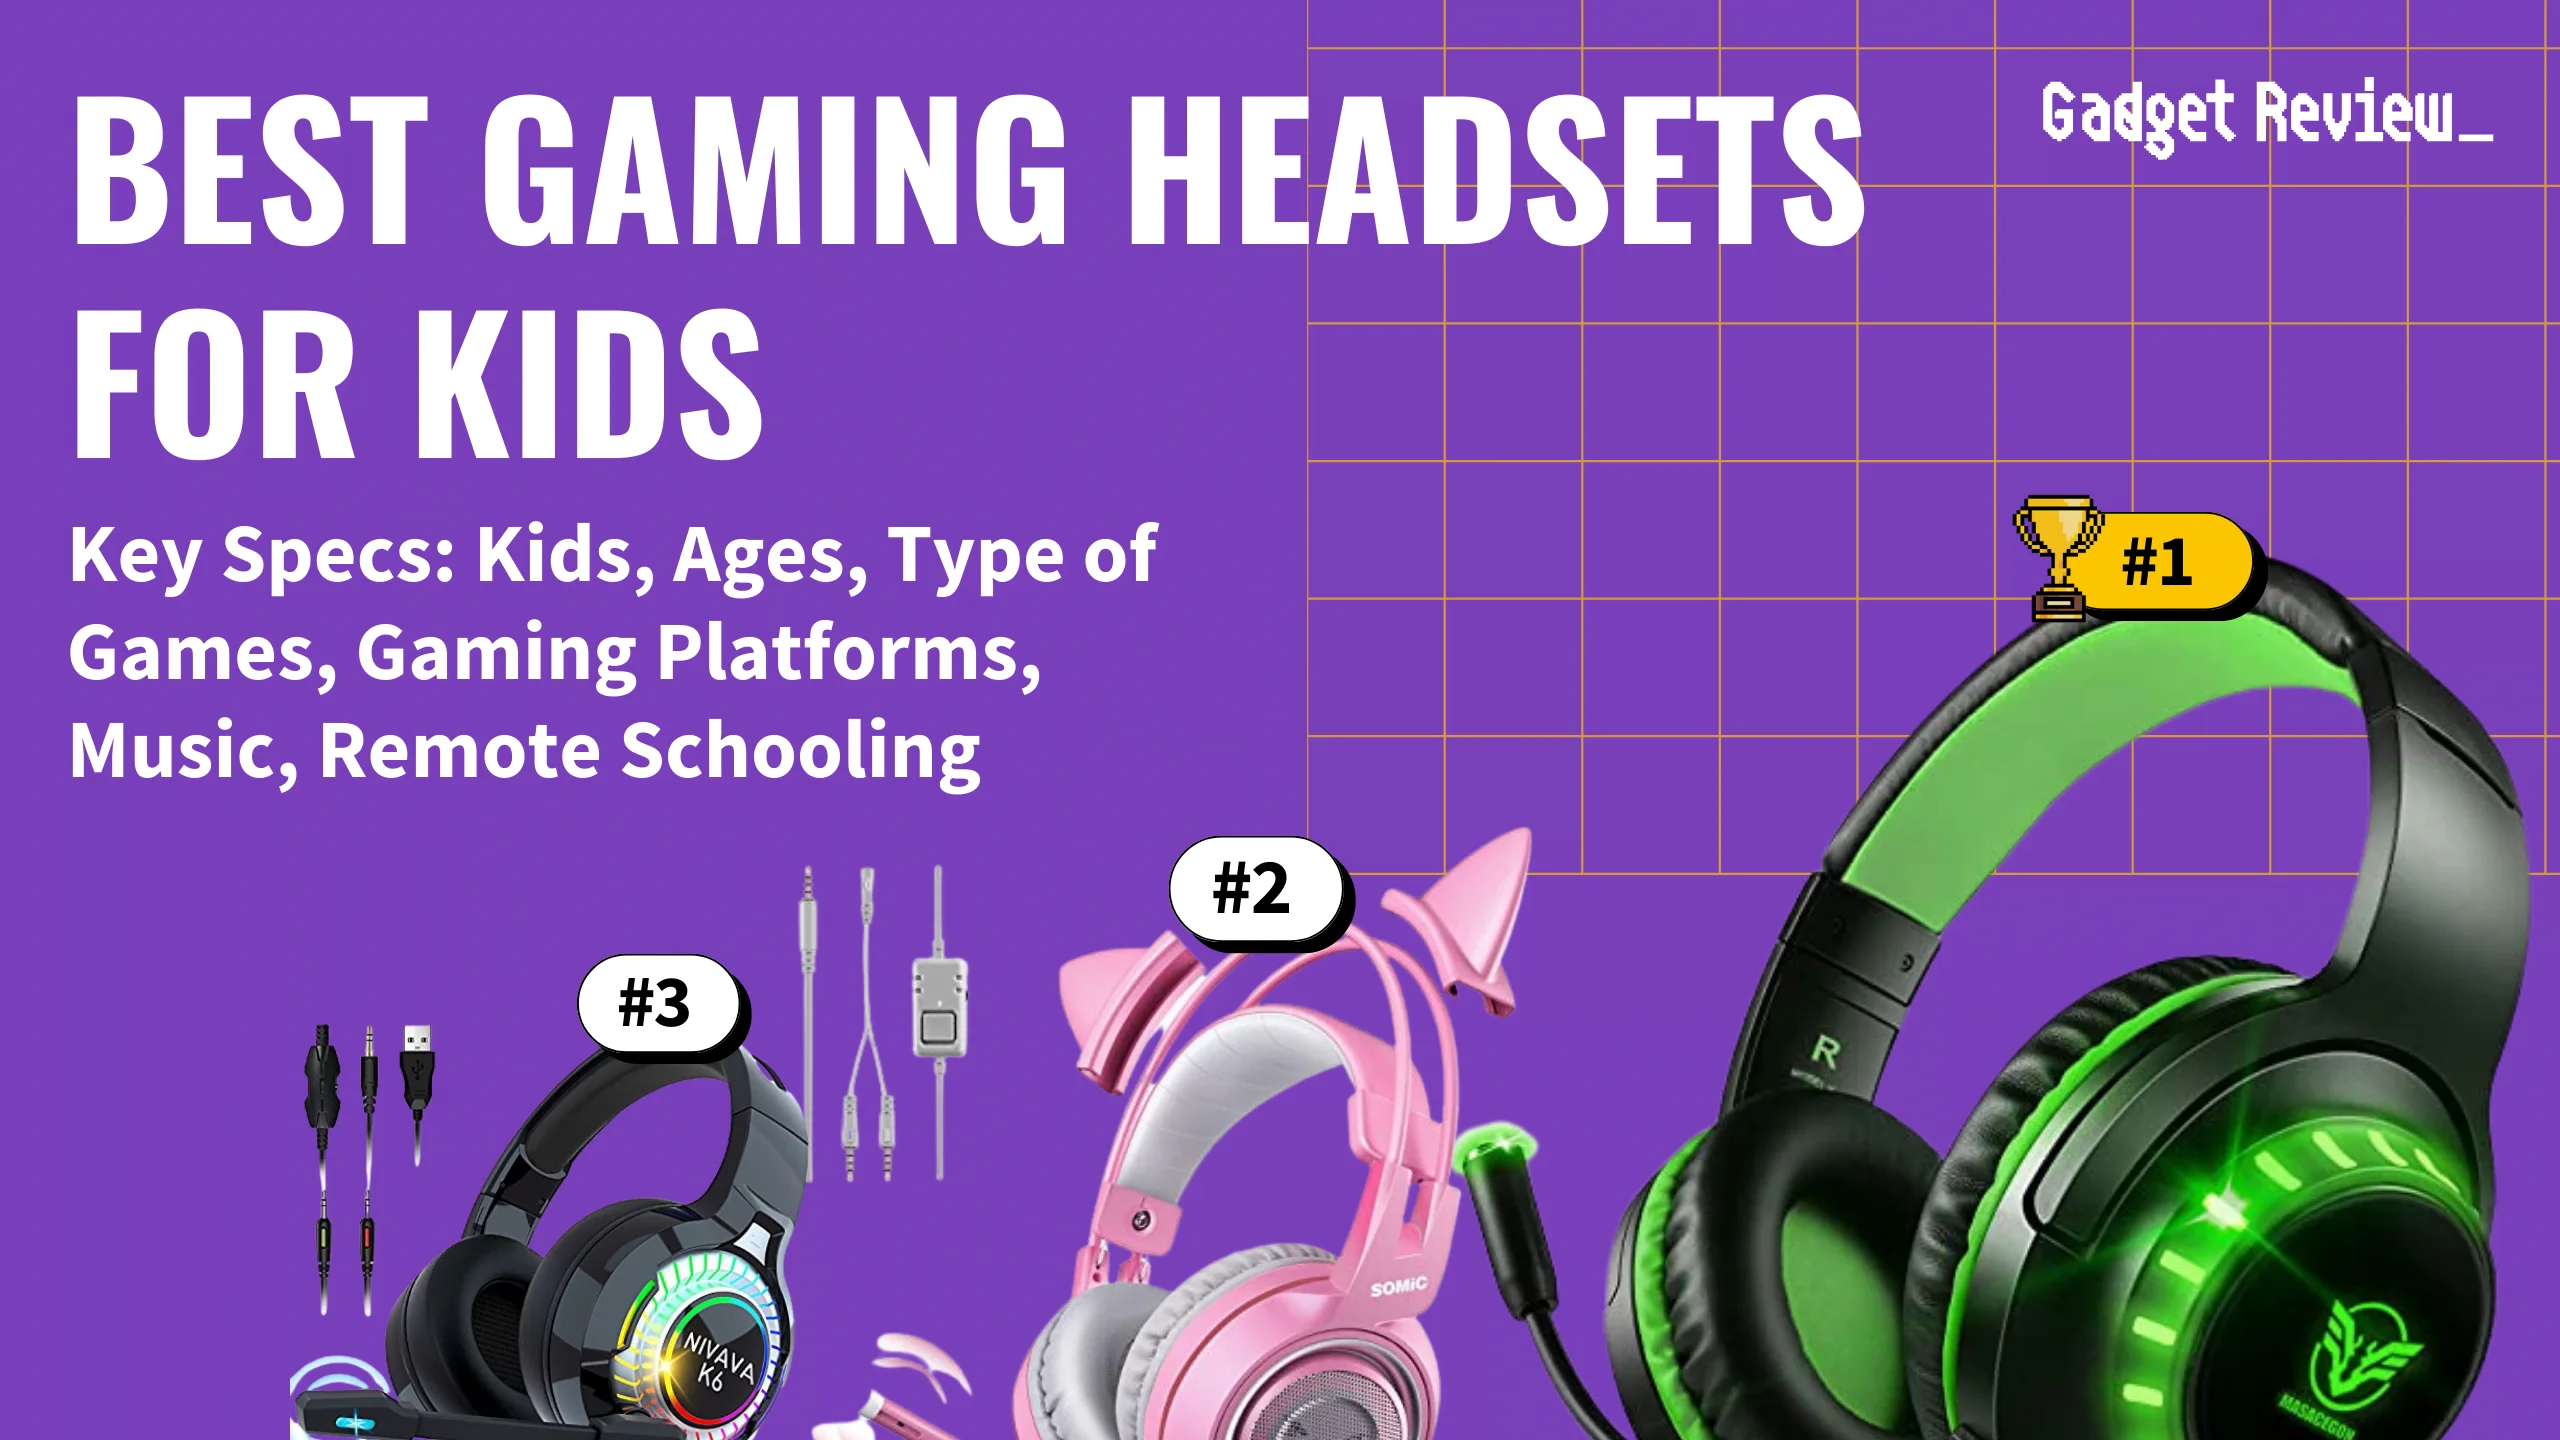 Best Gaming Headsets for Kids